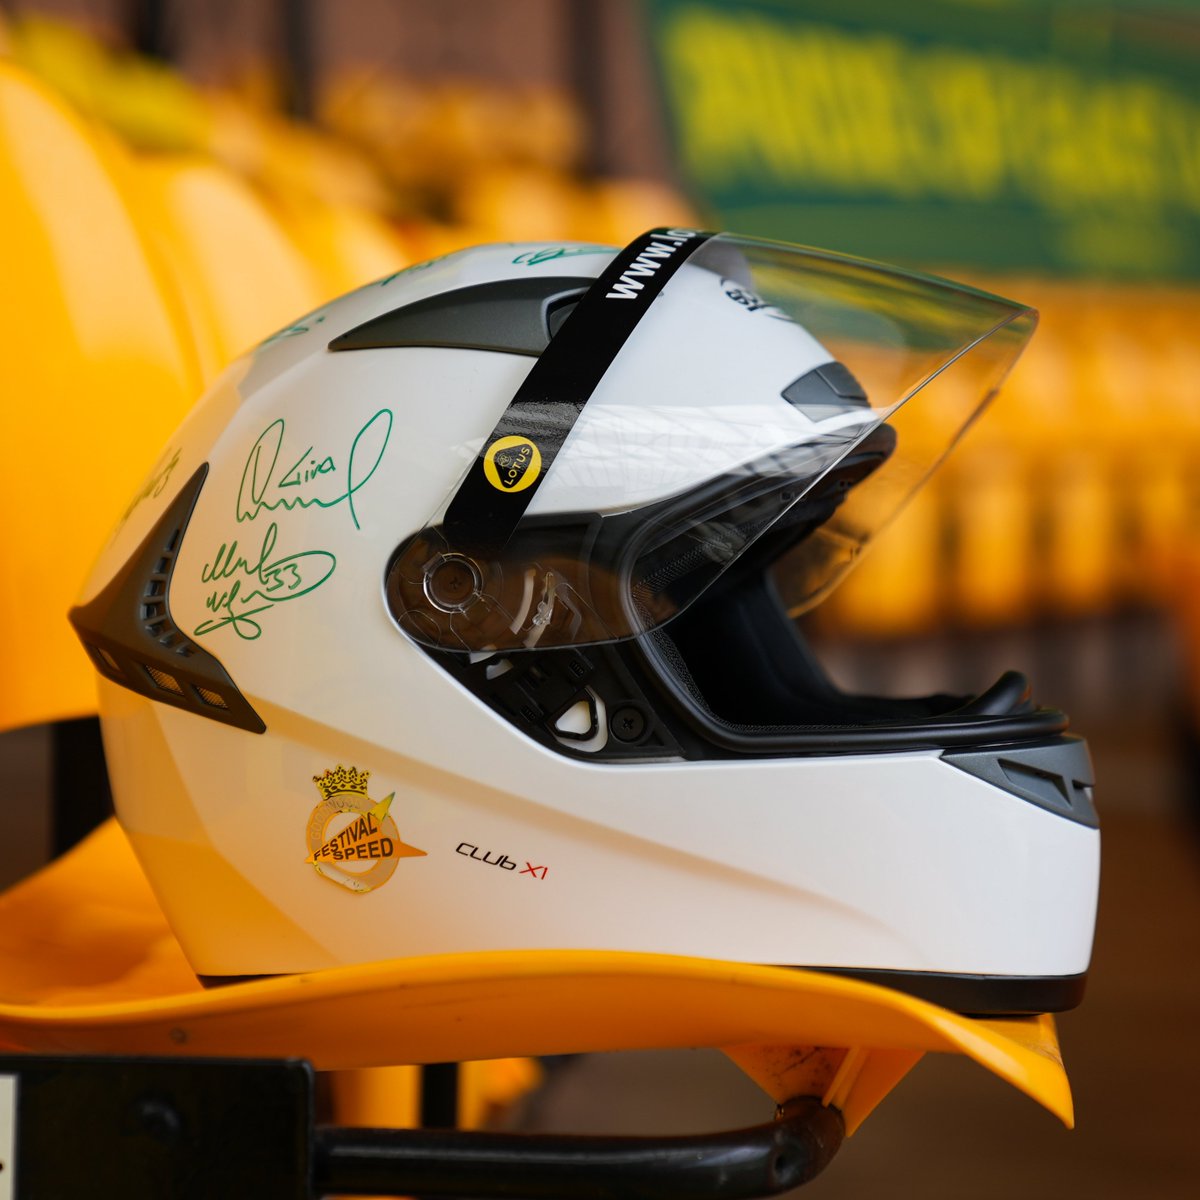 Want to win this helmet signed by the squad? 😍 Retweet this post and make sure you're following @lotuscars to be in with a chance! #DrivingInclusion